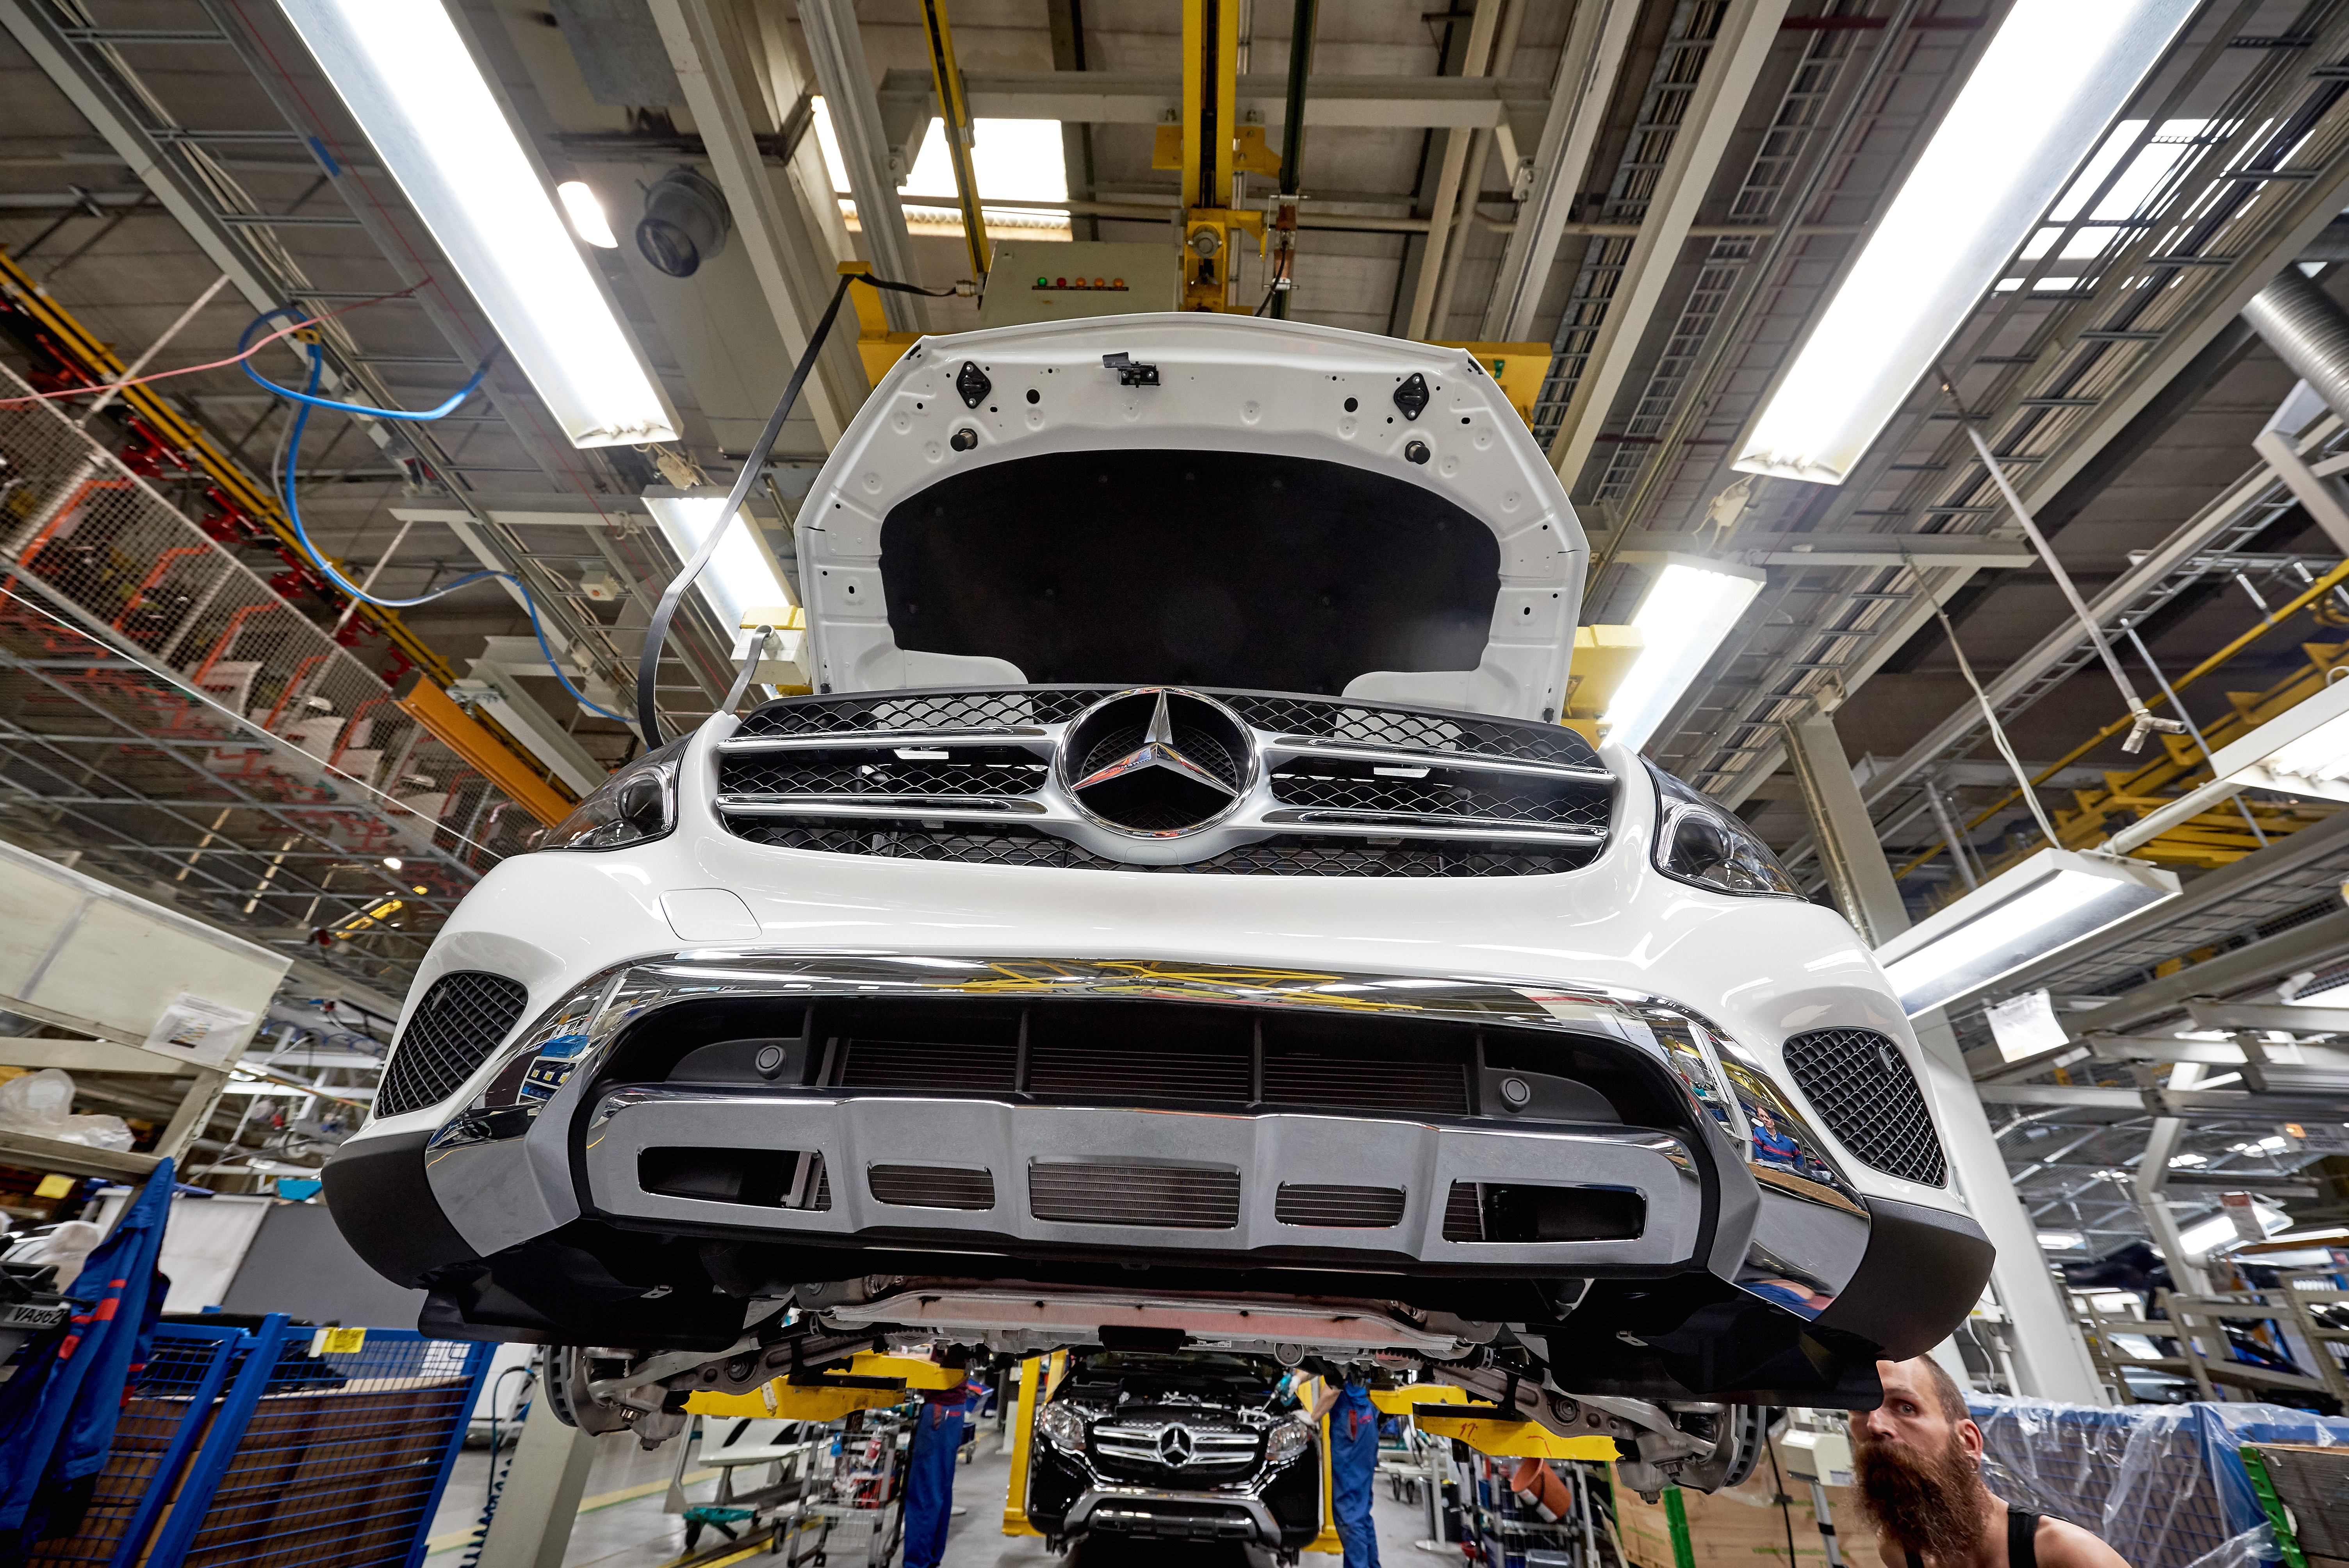 Mercedes sports cars roll off the production line to the west coast of Finland